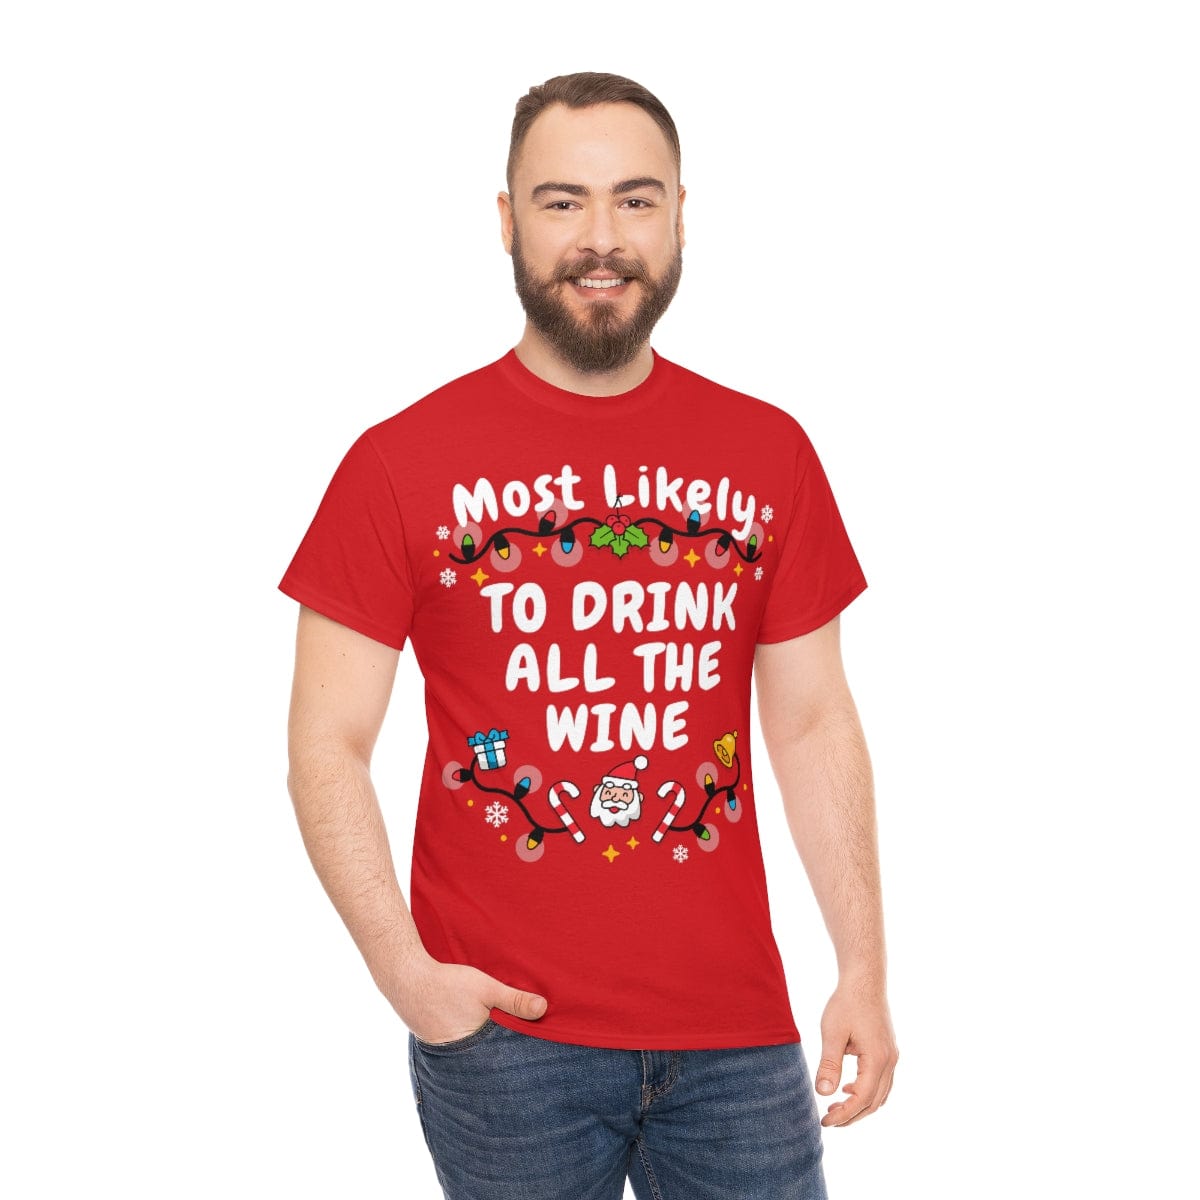 TO DRINK ALL THE WINE